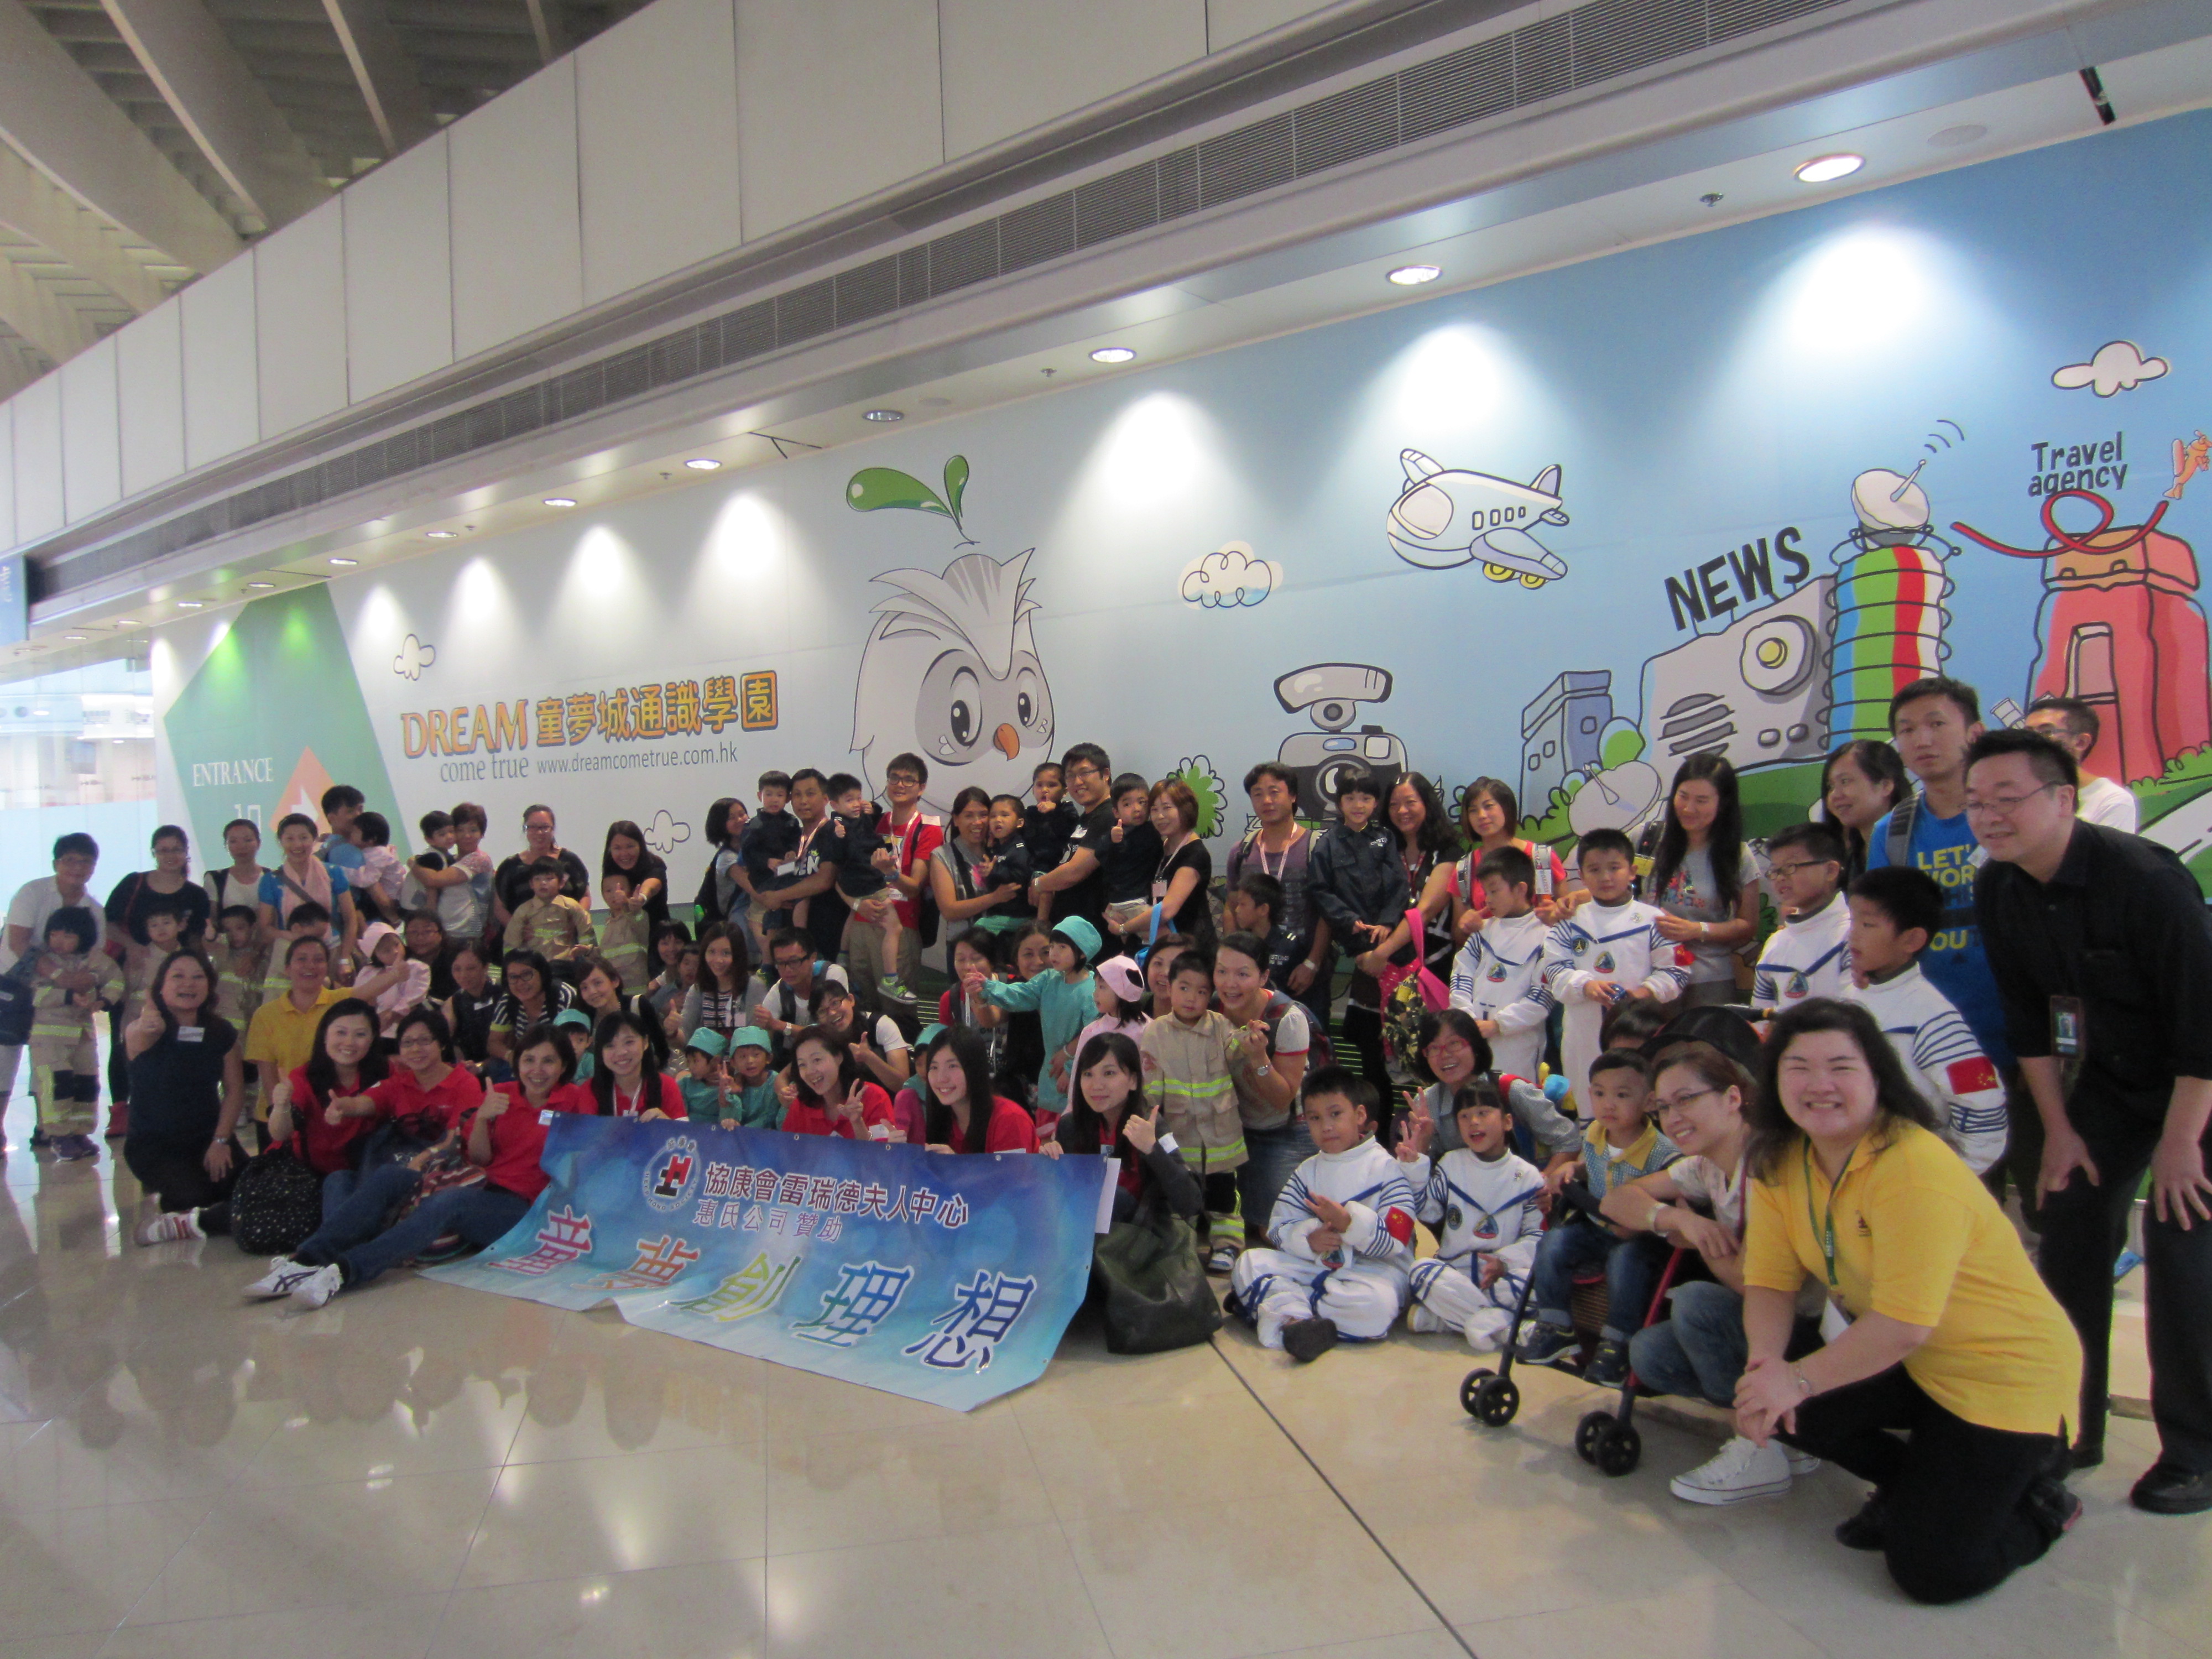 Wyeth (Hong Kong) Holding Company Limited visited ‘Dream Come True’ with the children and their parents from Alice Louey Centre